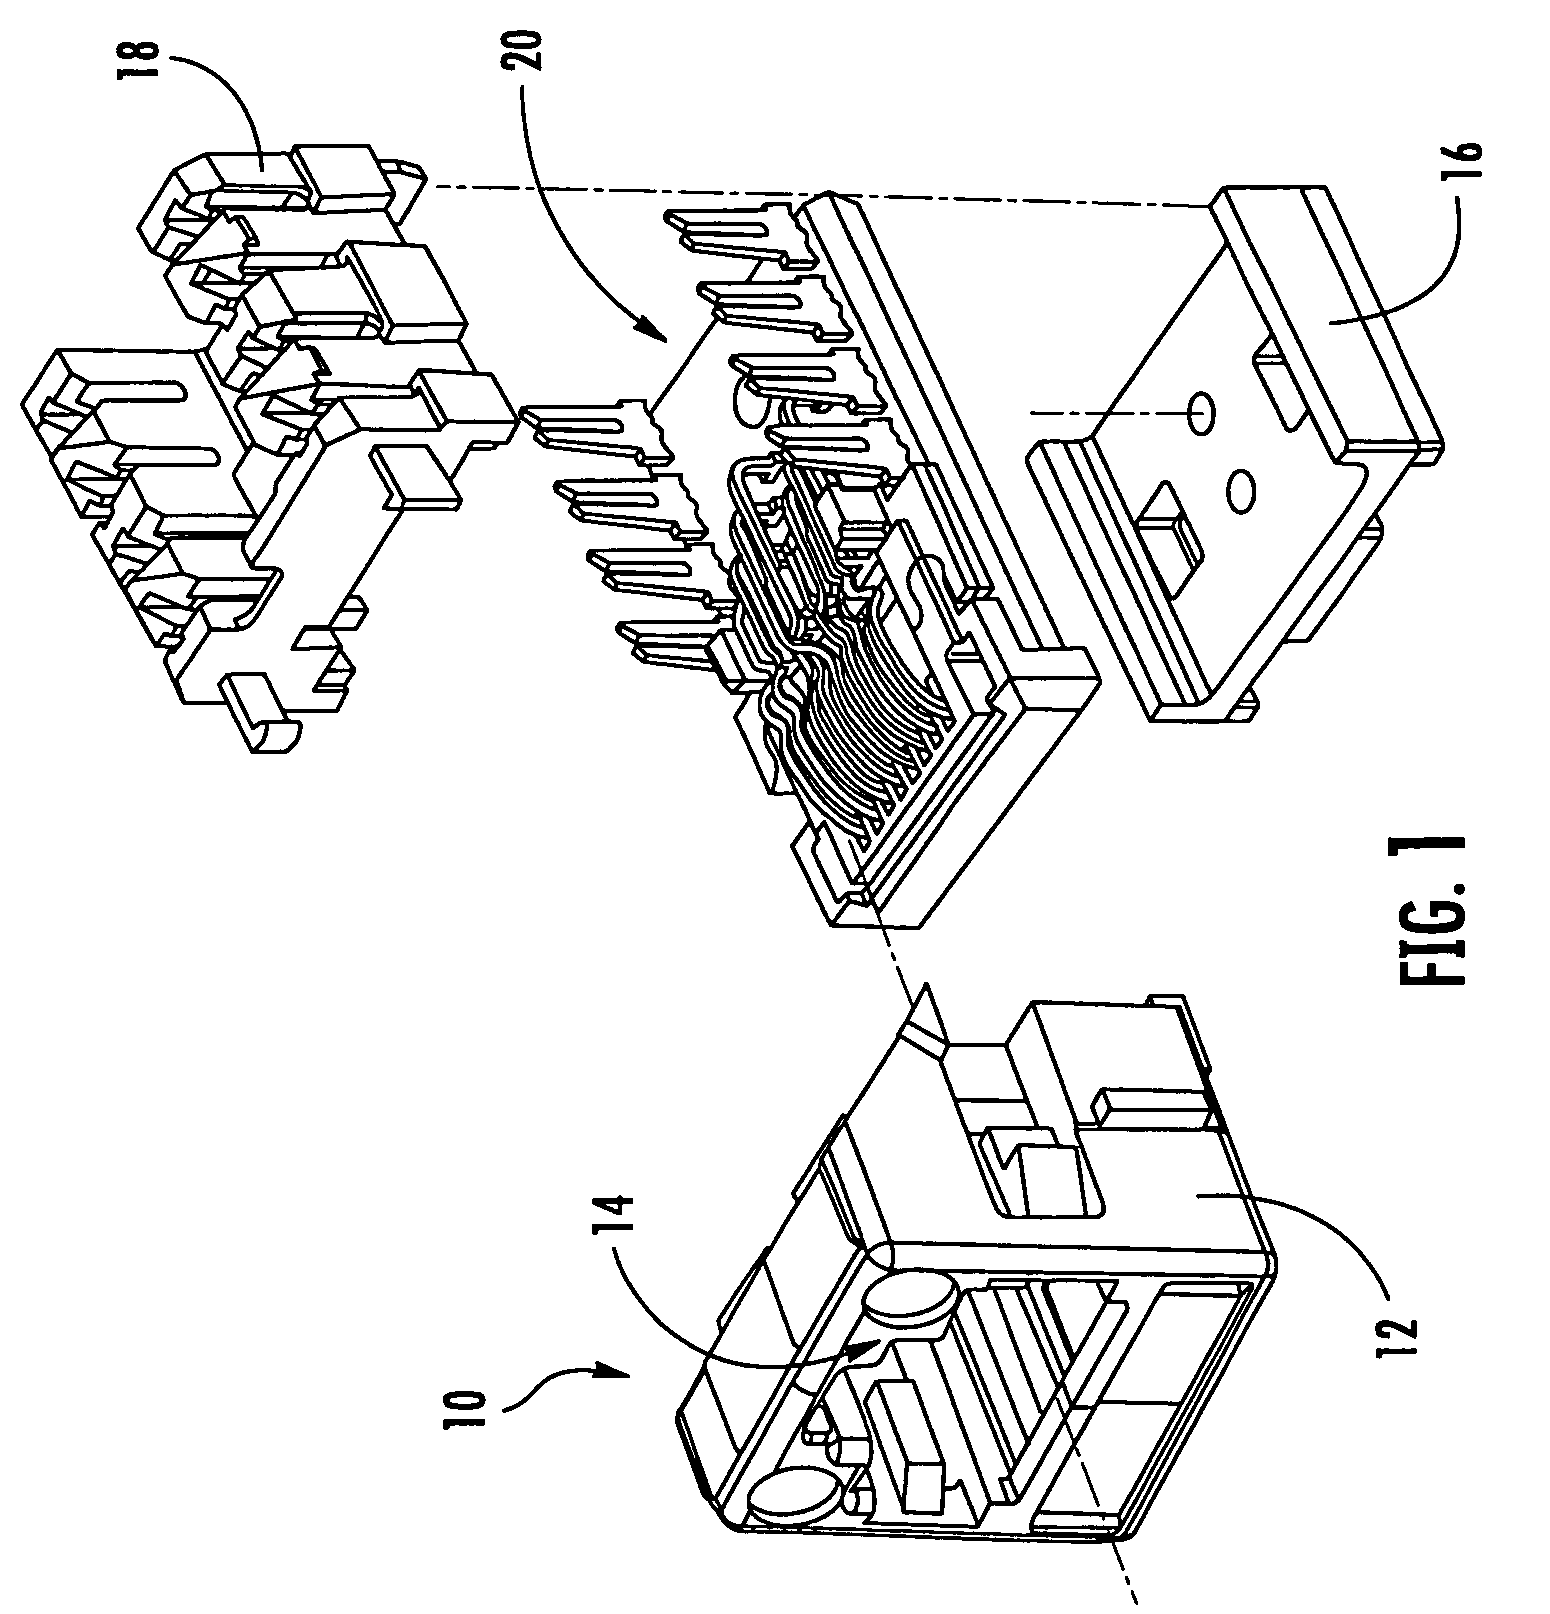 Communications jack with printed wiring board having paired coupling conductors